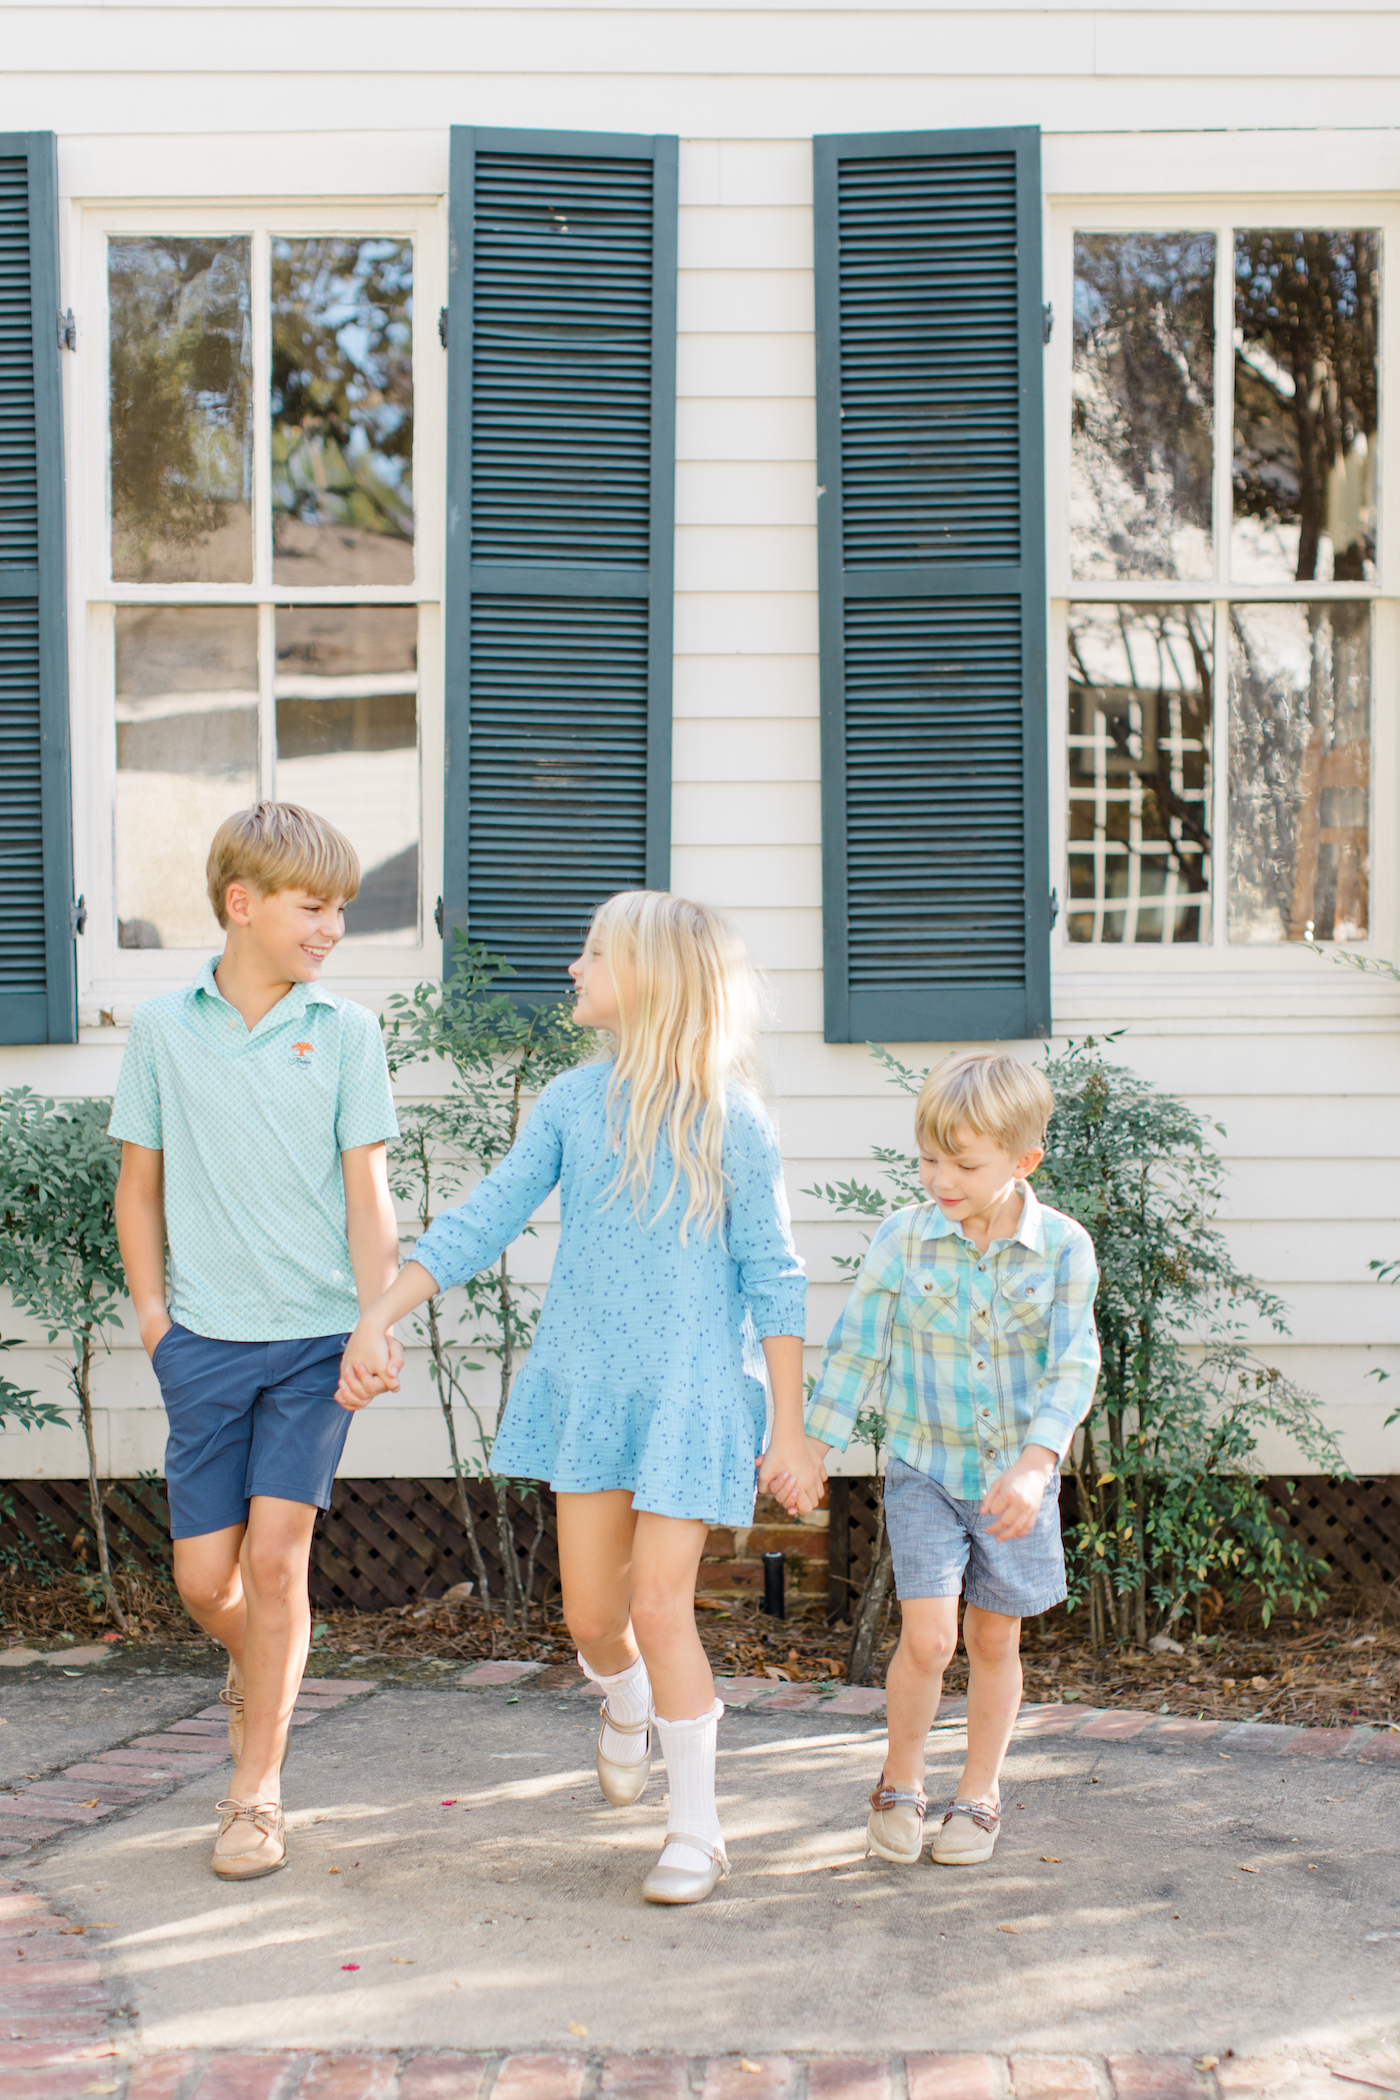 Family Christmas Card Photo Style Ideas // photos by photographer Linsday Ott from Mississippi